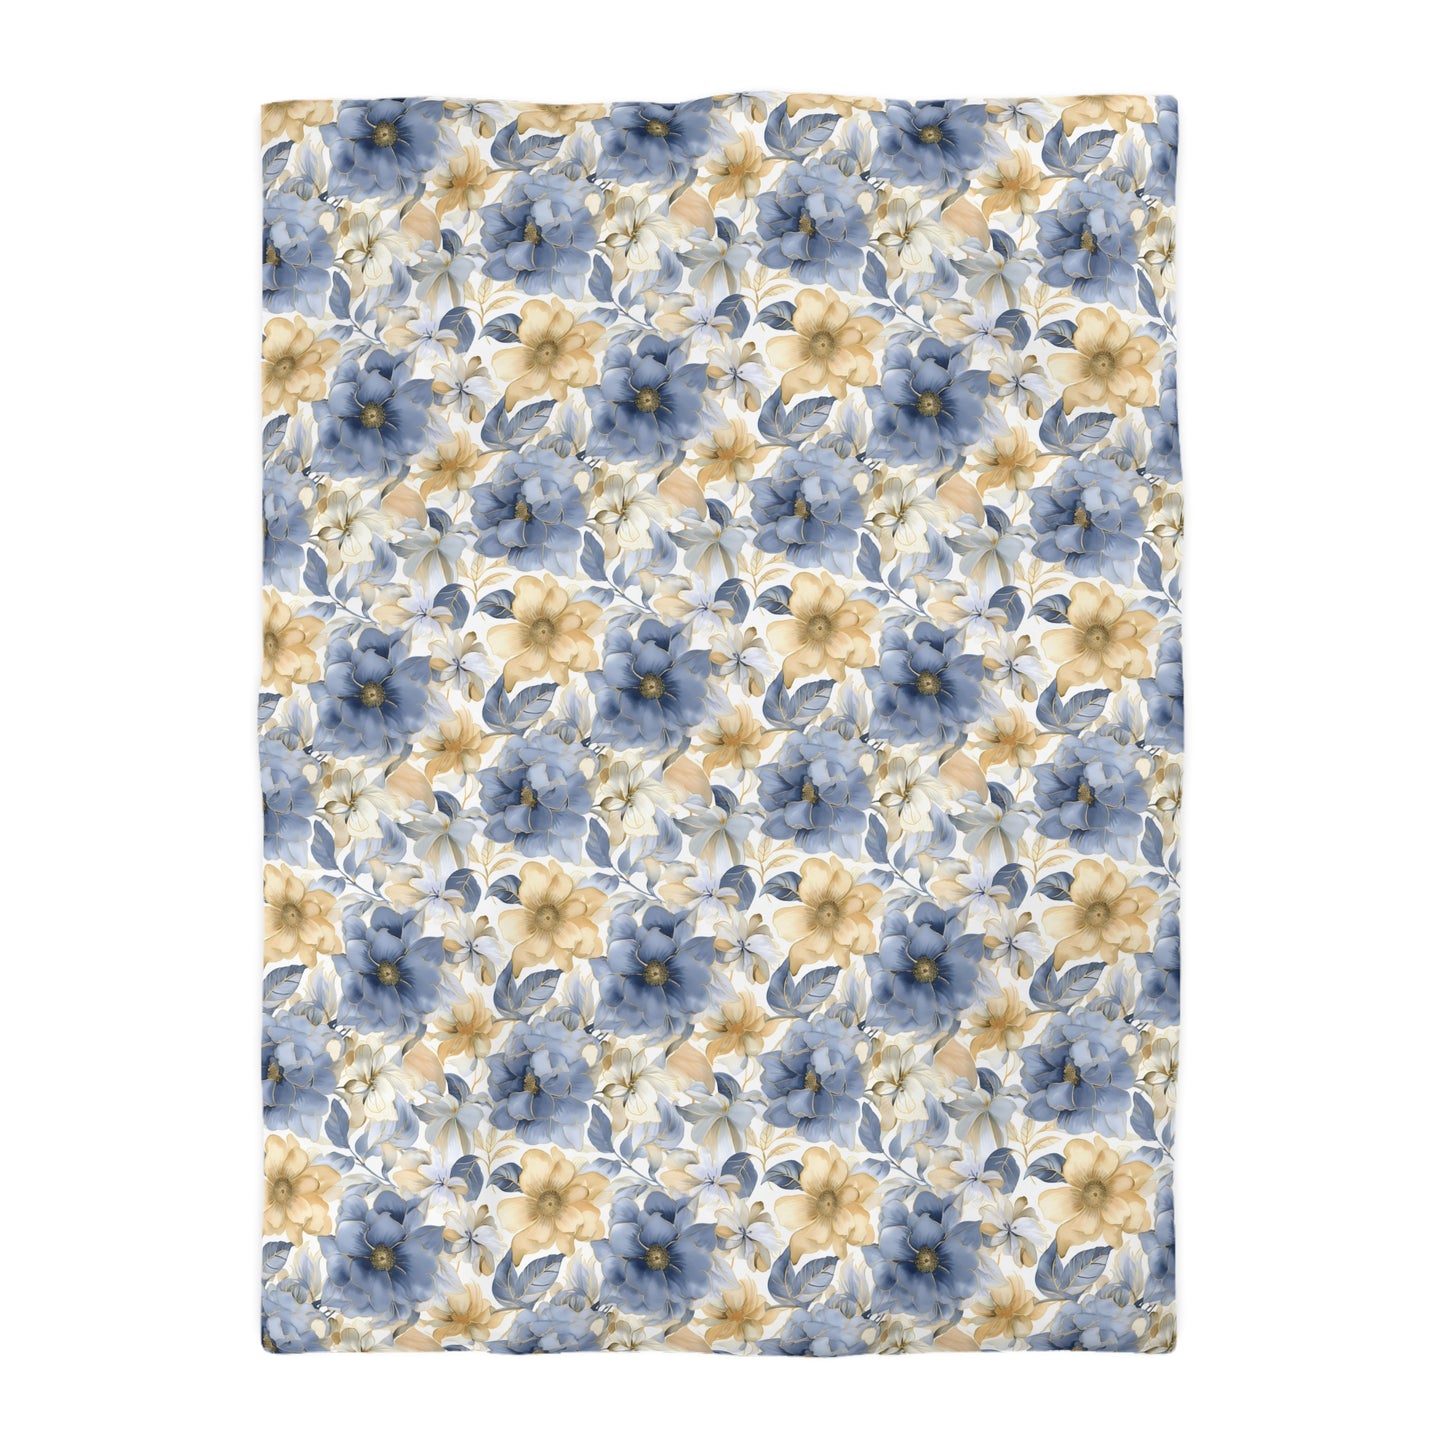 Blue And Gold Floral Duvet Cover